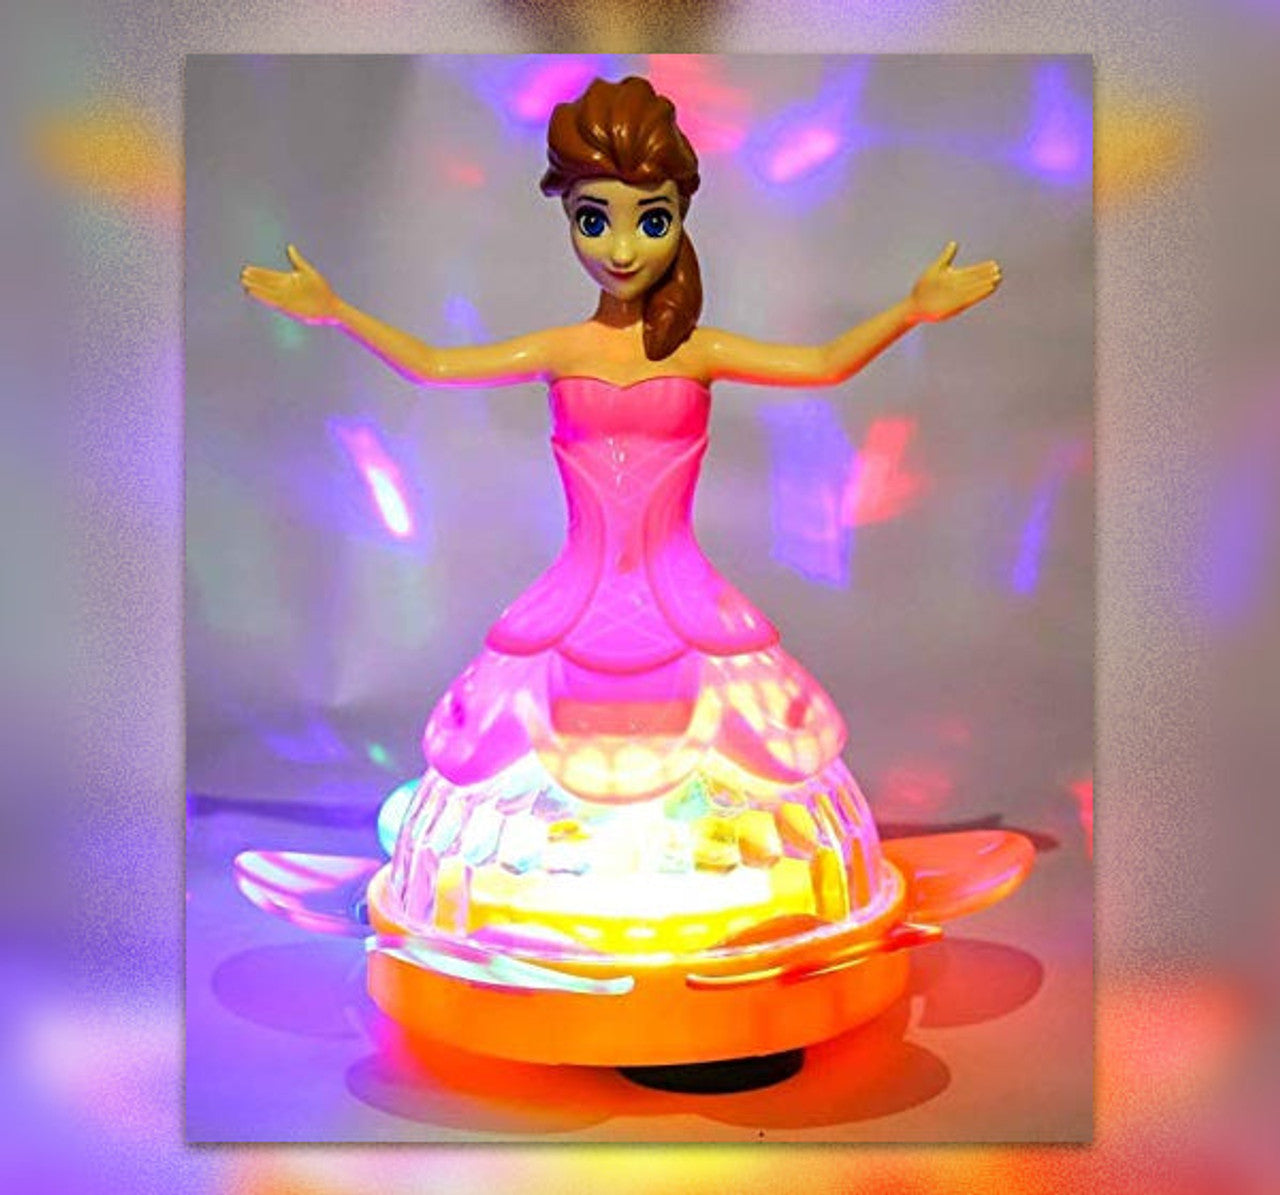 Dream Princess Doll With Music And 4D Lights For Kids